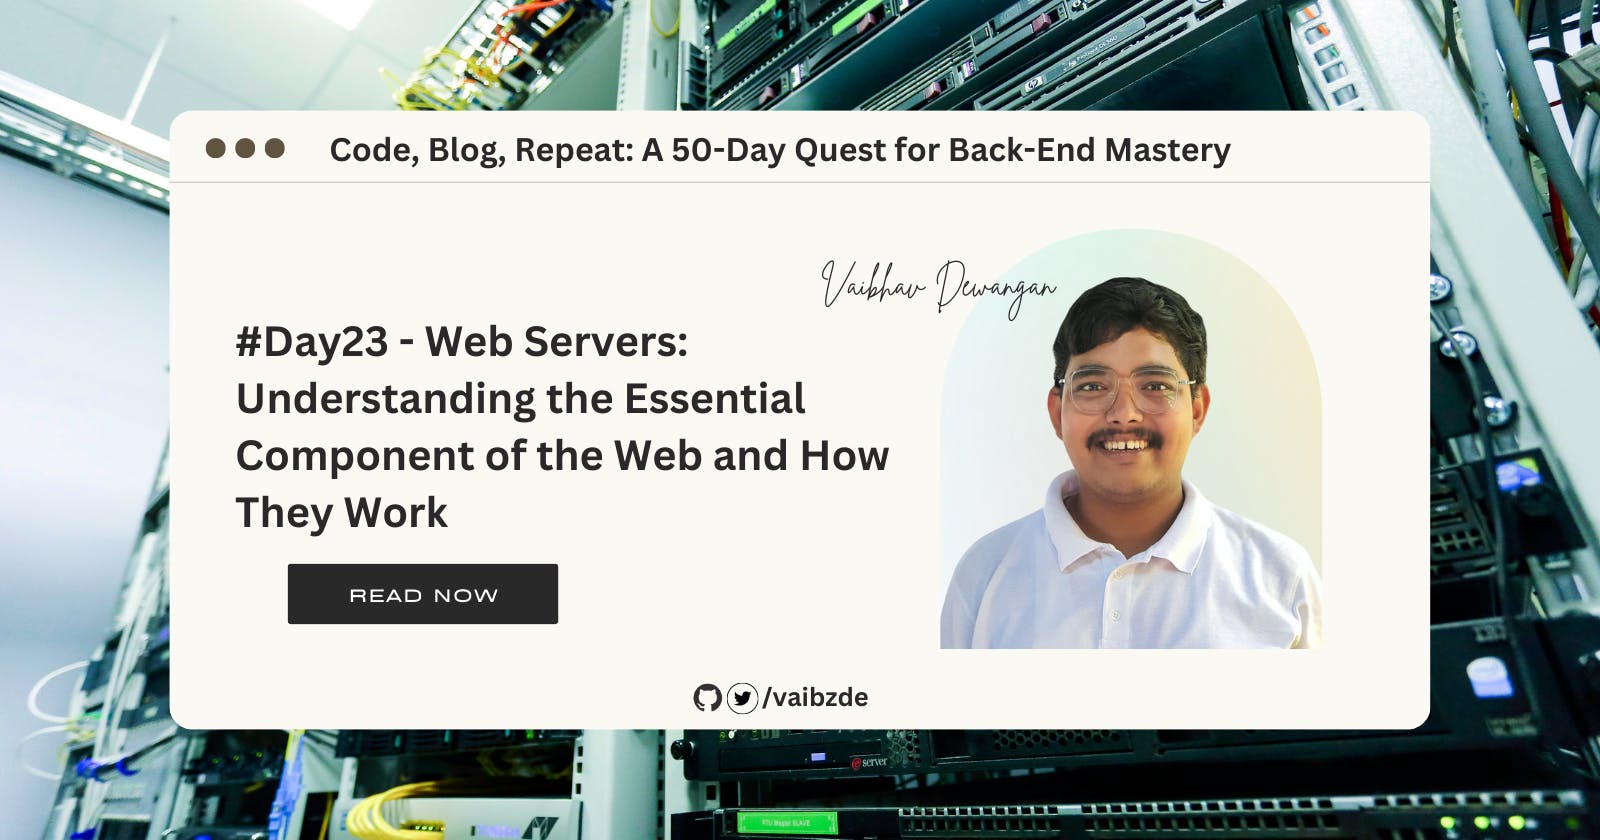 #Day23 - Web Servers: Understanding the Essential Component of the Web and How They Work